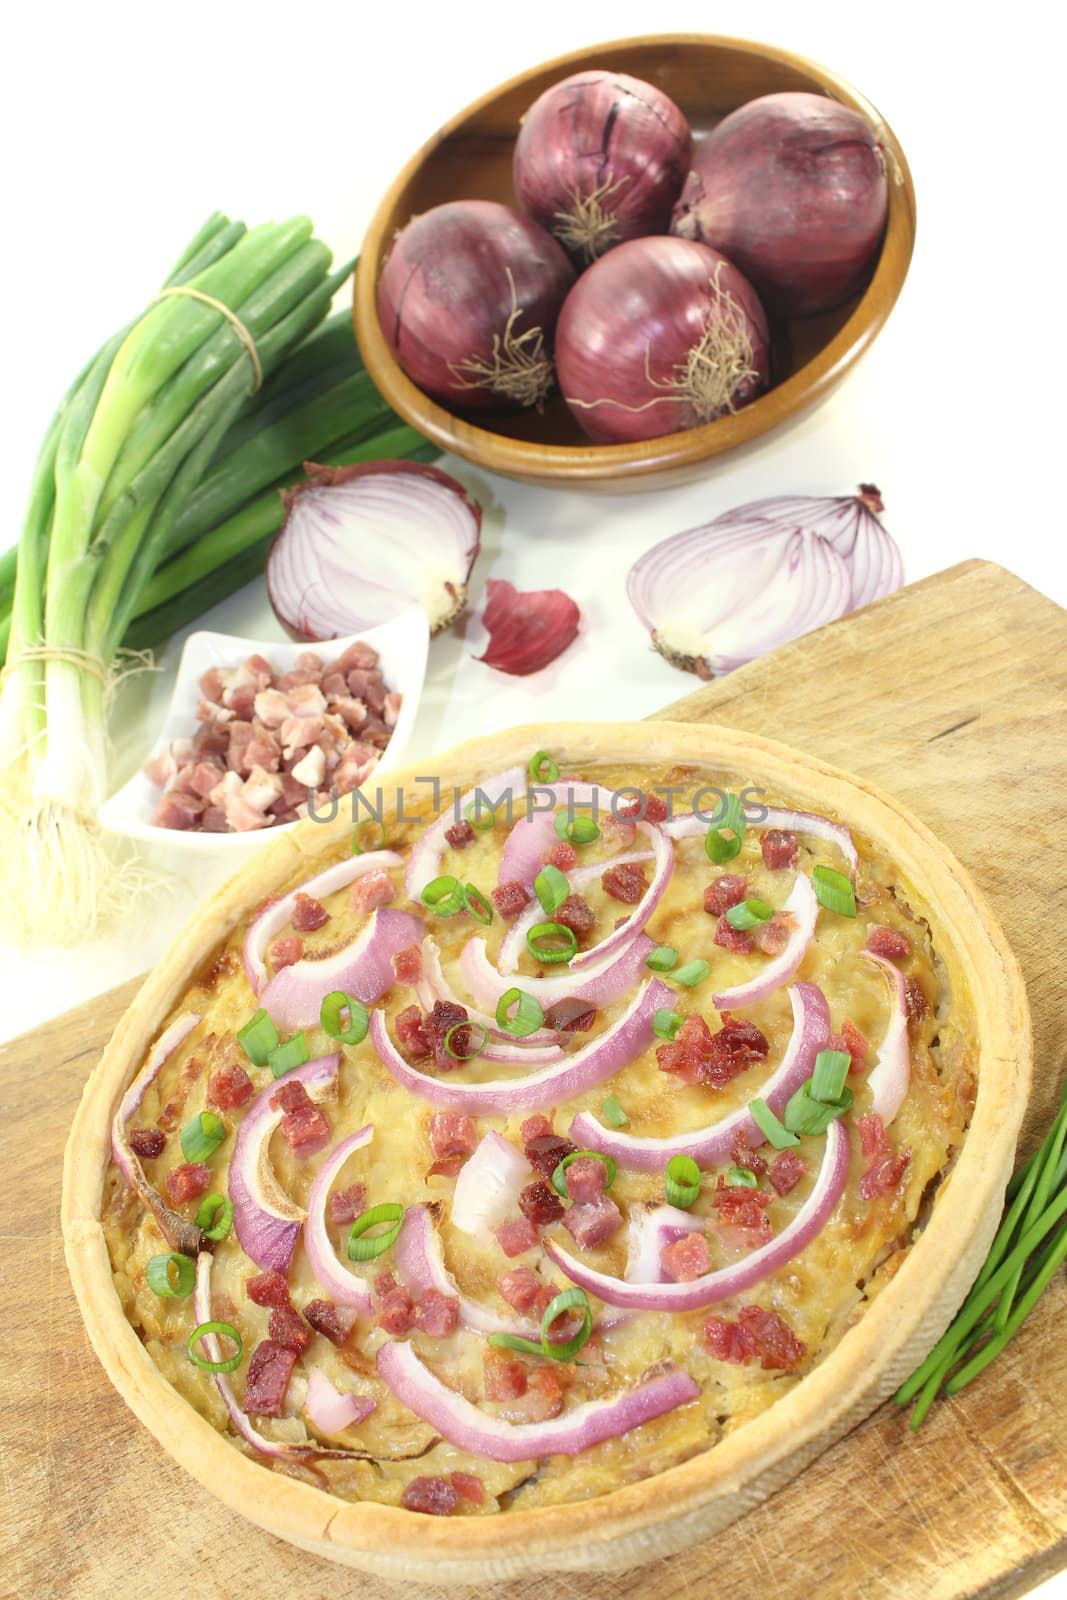 Onion tart with leeks by discovery